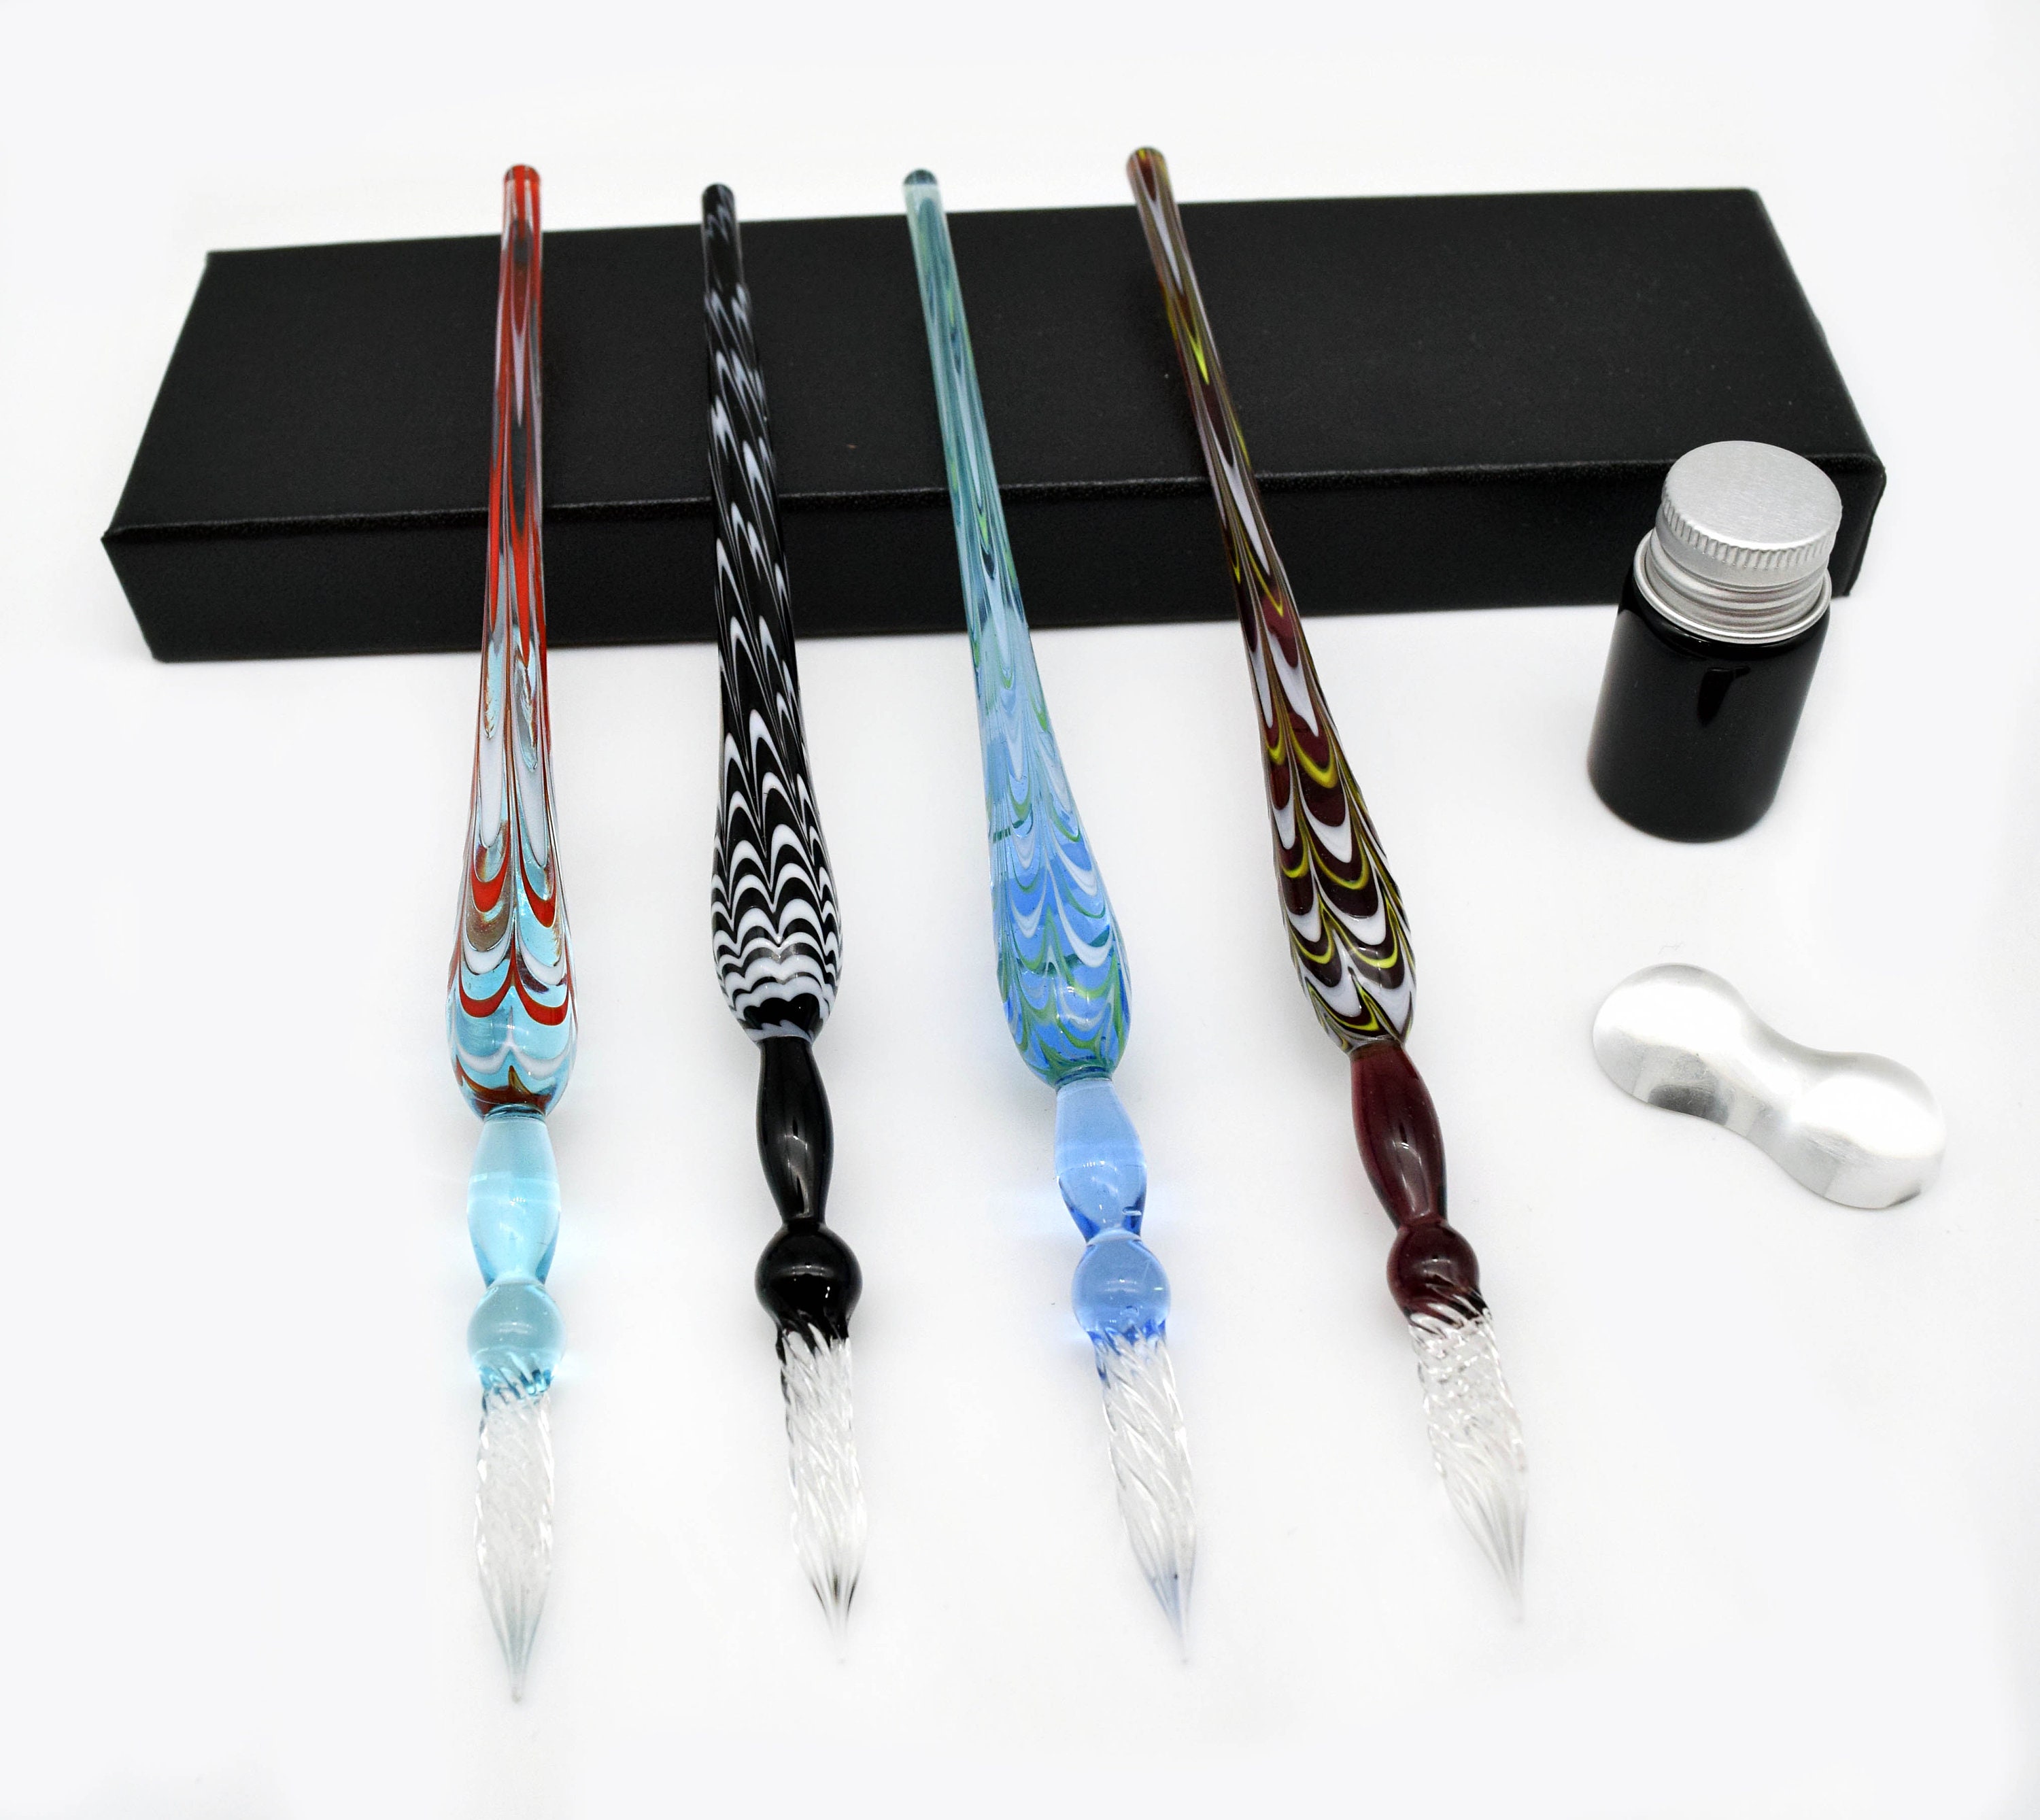 Glass Calligraphy Pen Set With Tassels, Glass Pen Gift Box Set